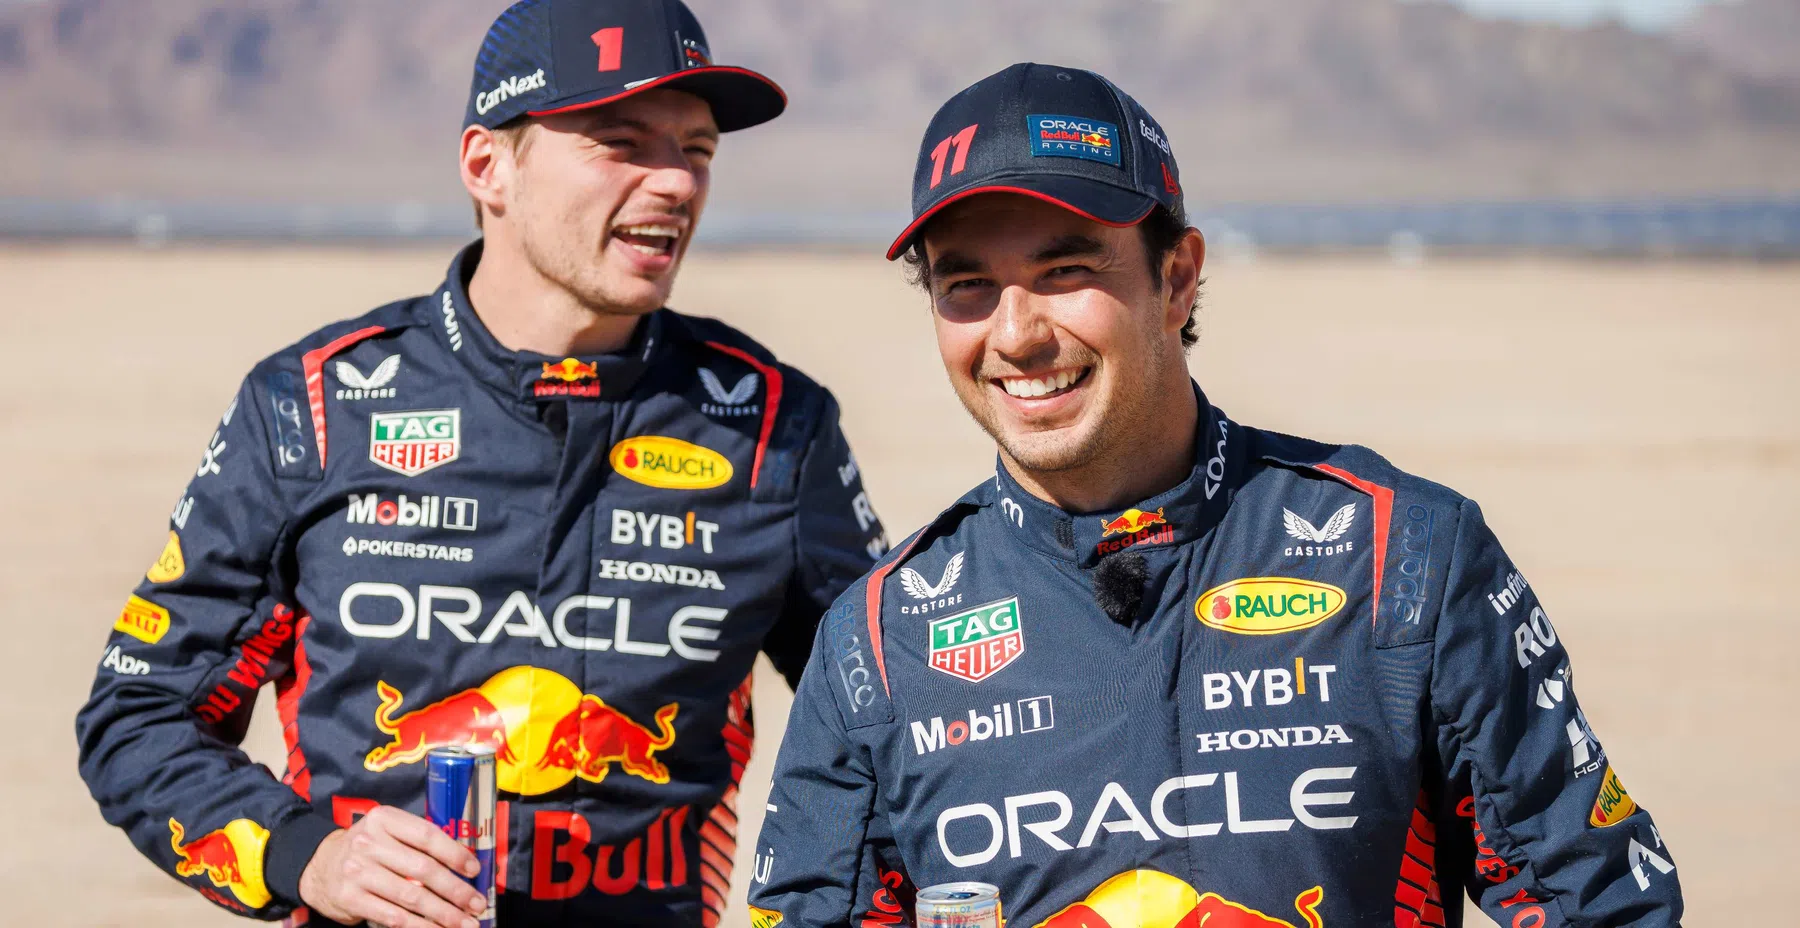 Verstappen and Perez have fun in Bahrain